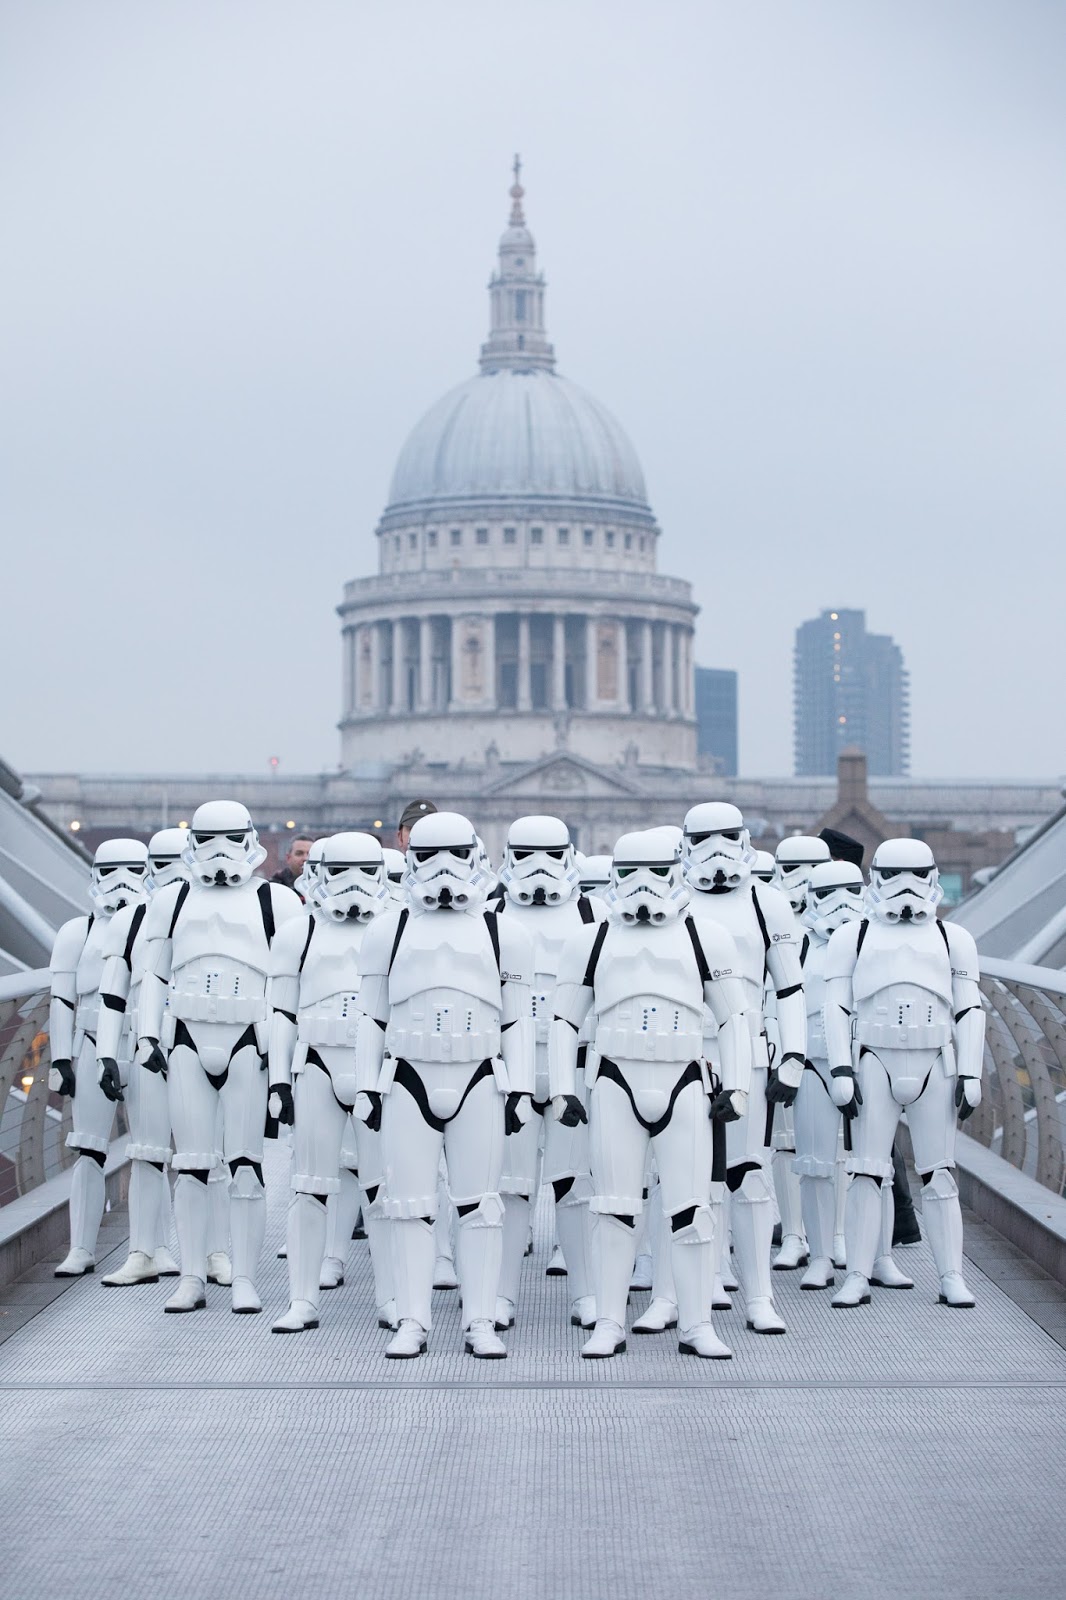 STAR WARS FANS DESCEND ON LONDON AHEAD OF ROGUE ONE A STAR WARS STORY